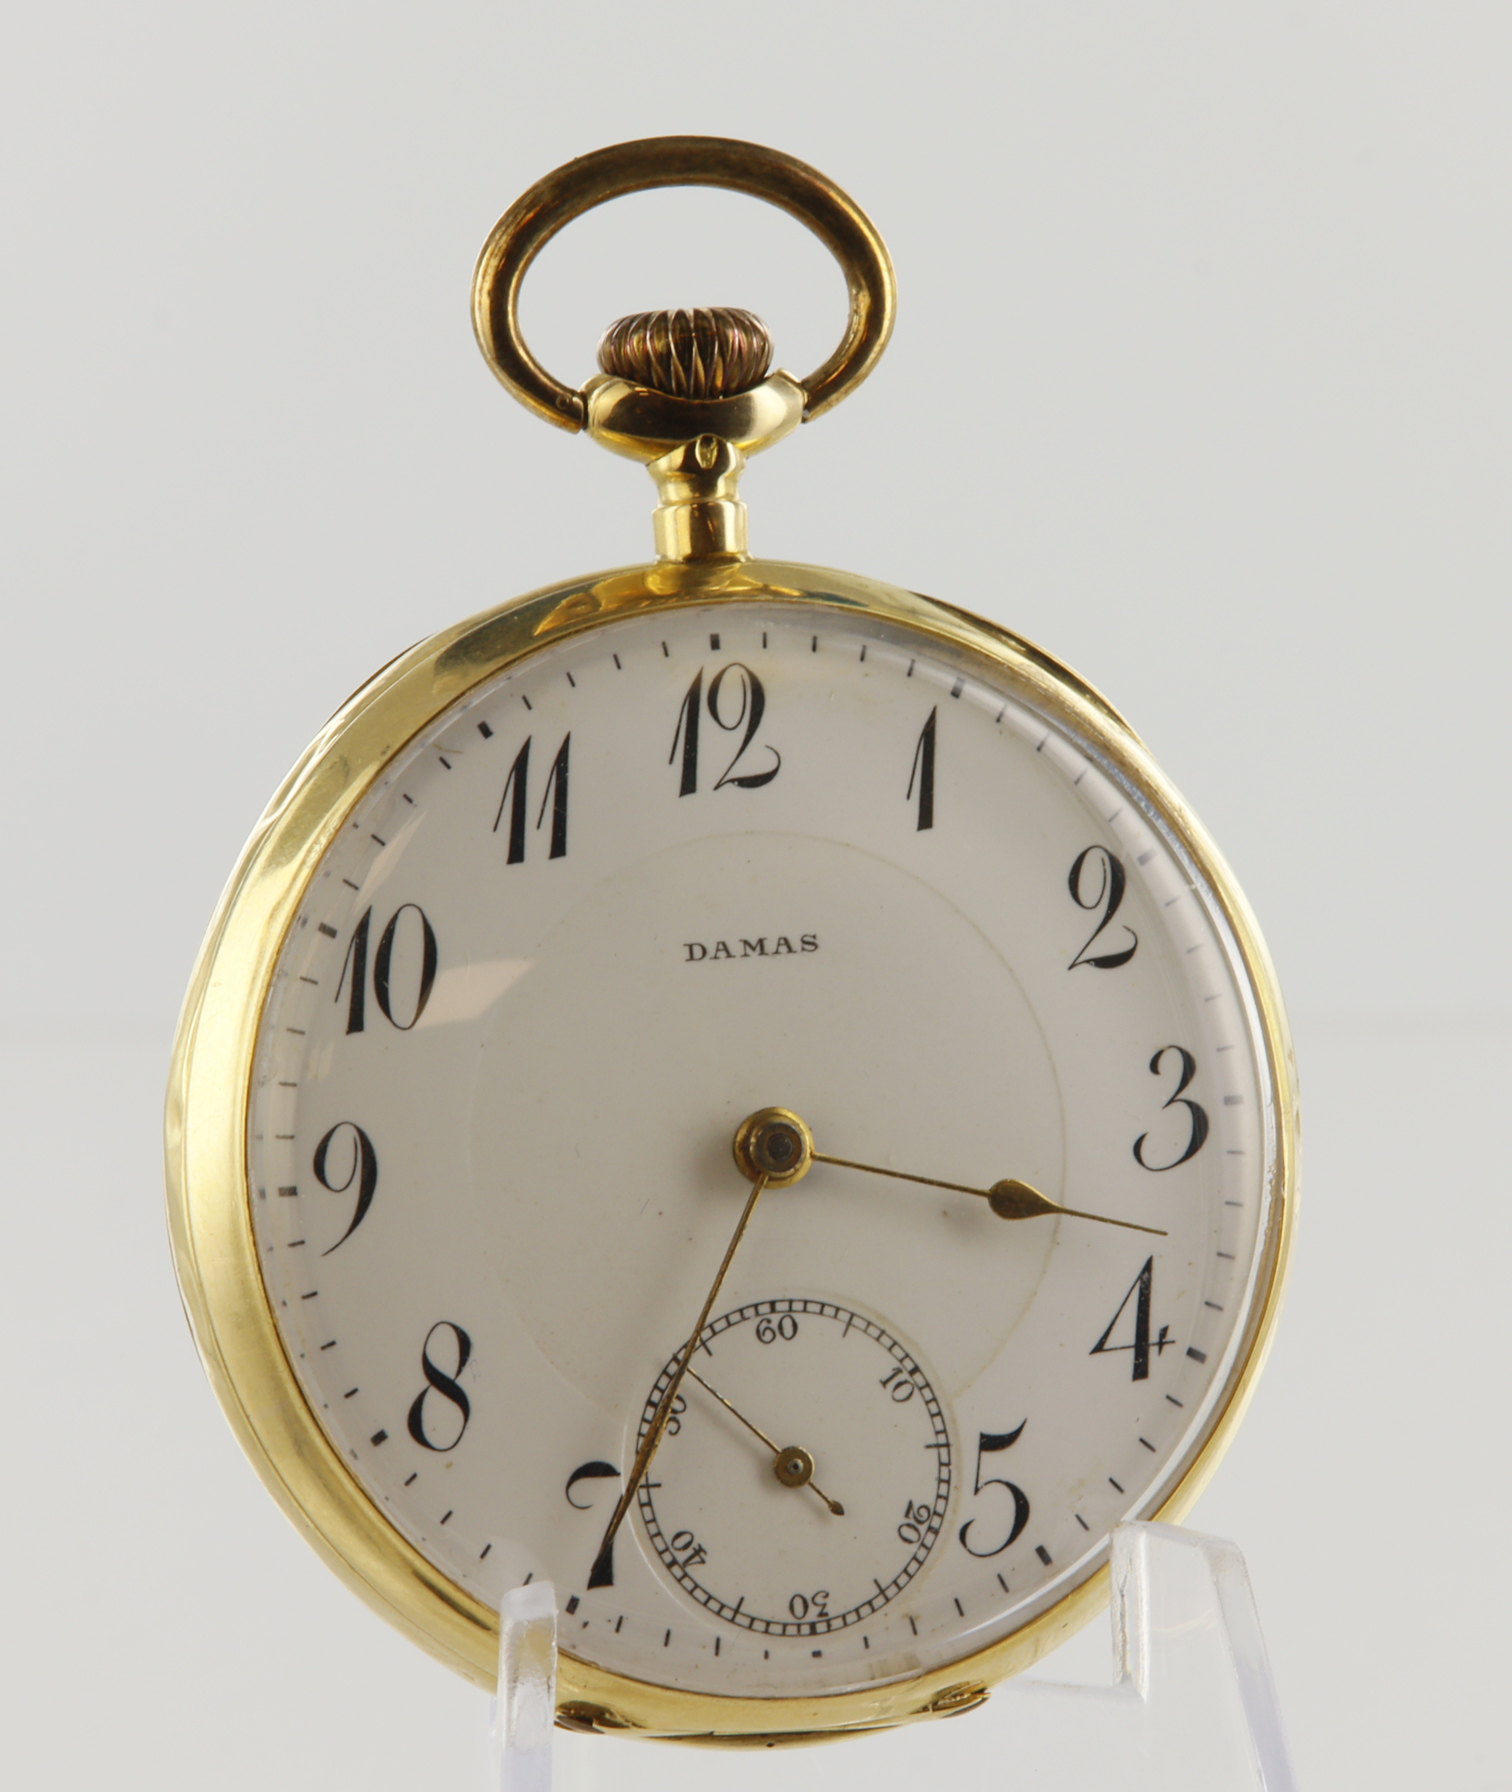 Gents 18ct cased open face stem-wind pocket watch by Damas, case bearing swiss Helvetia. The white